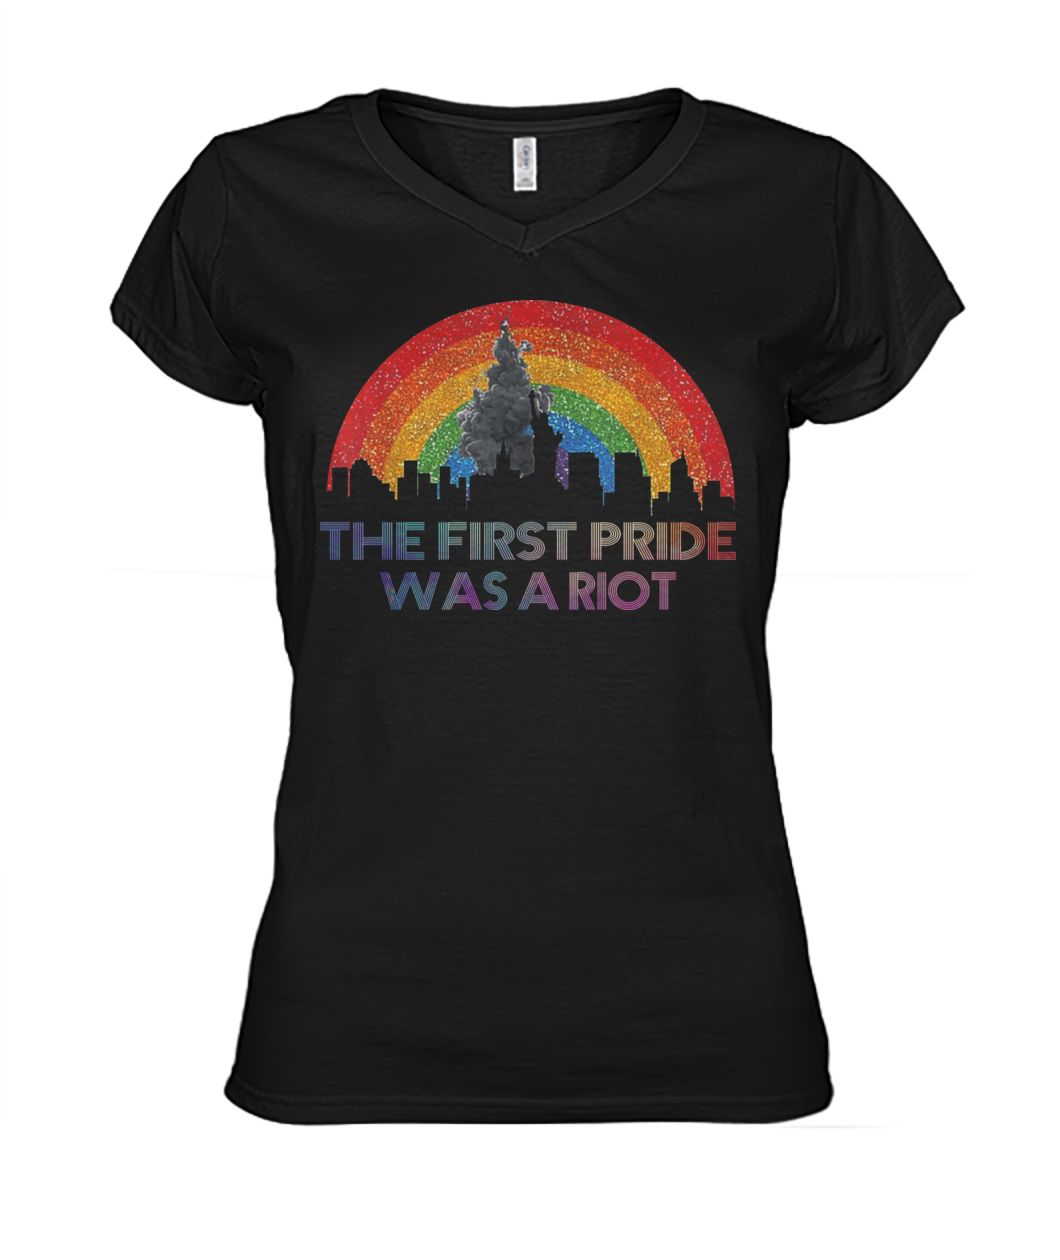 The first gay pride was a riot LGBT women's v-neck